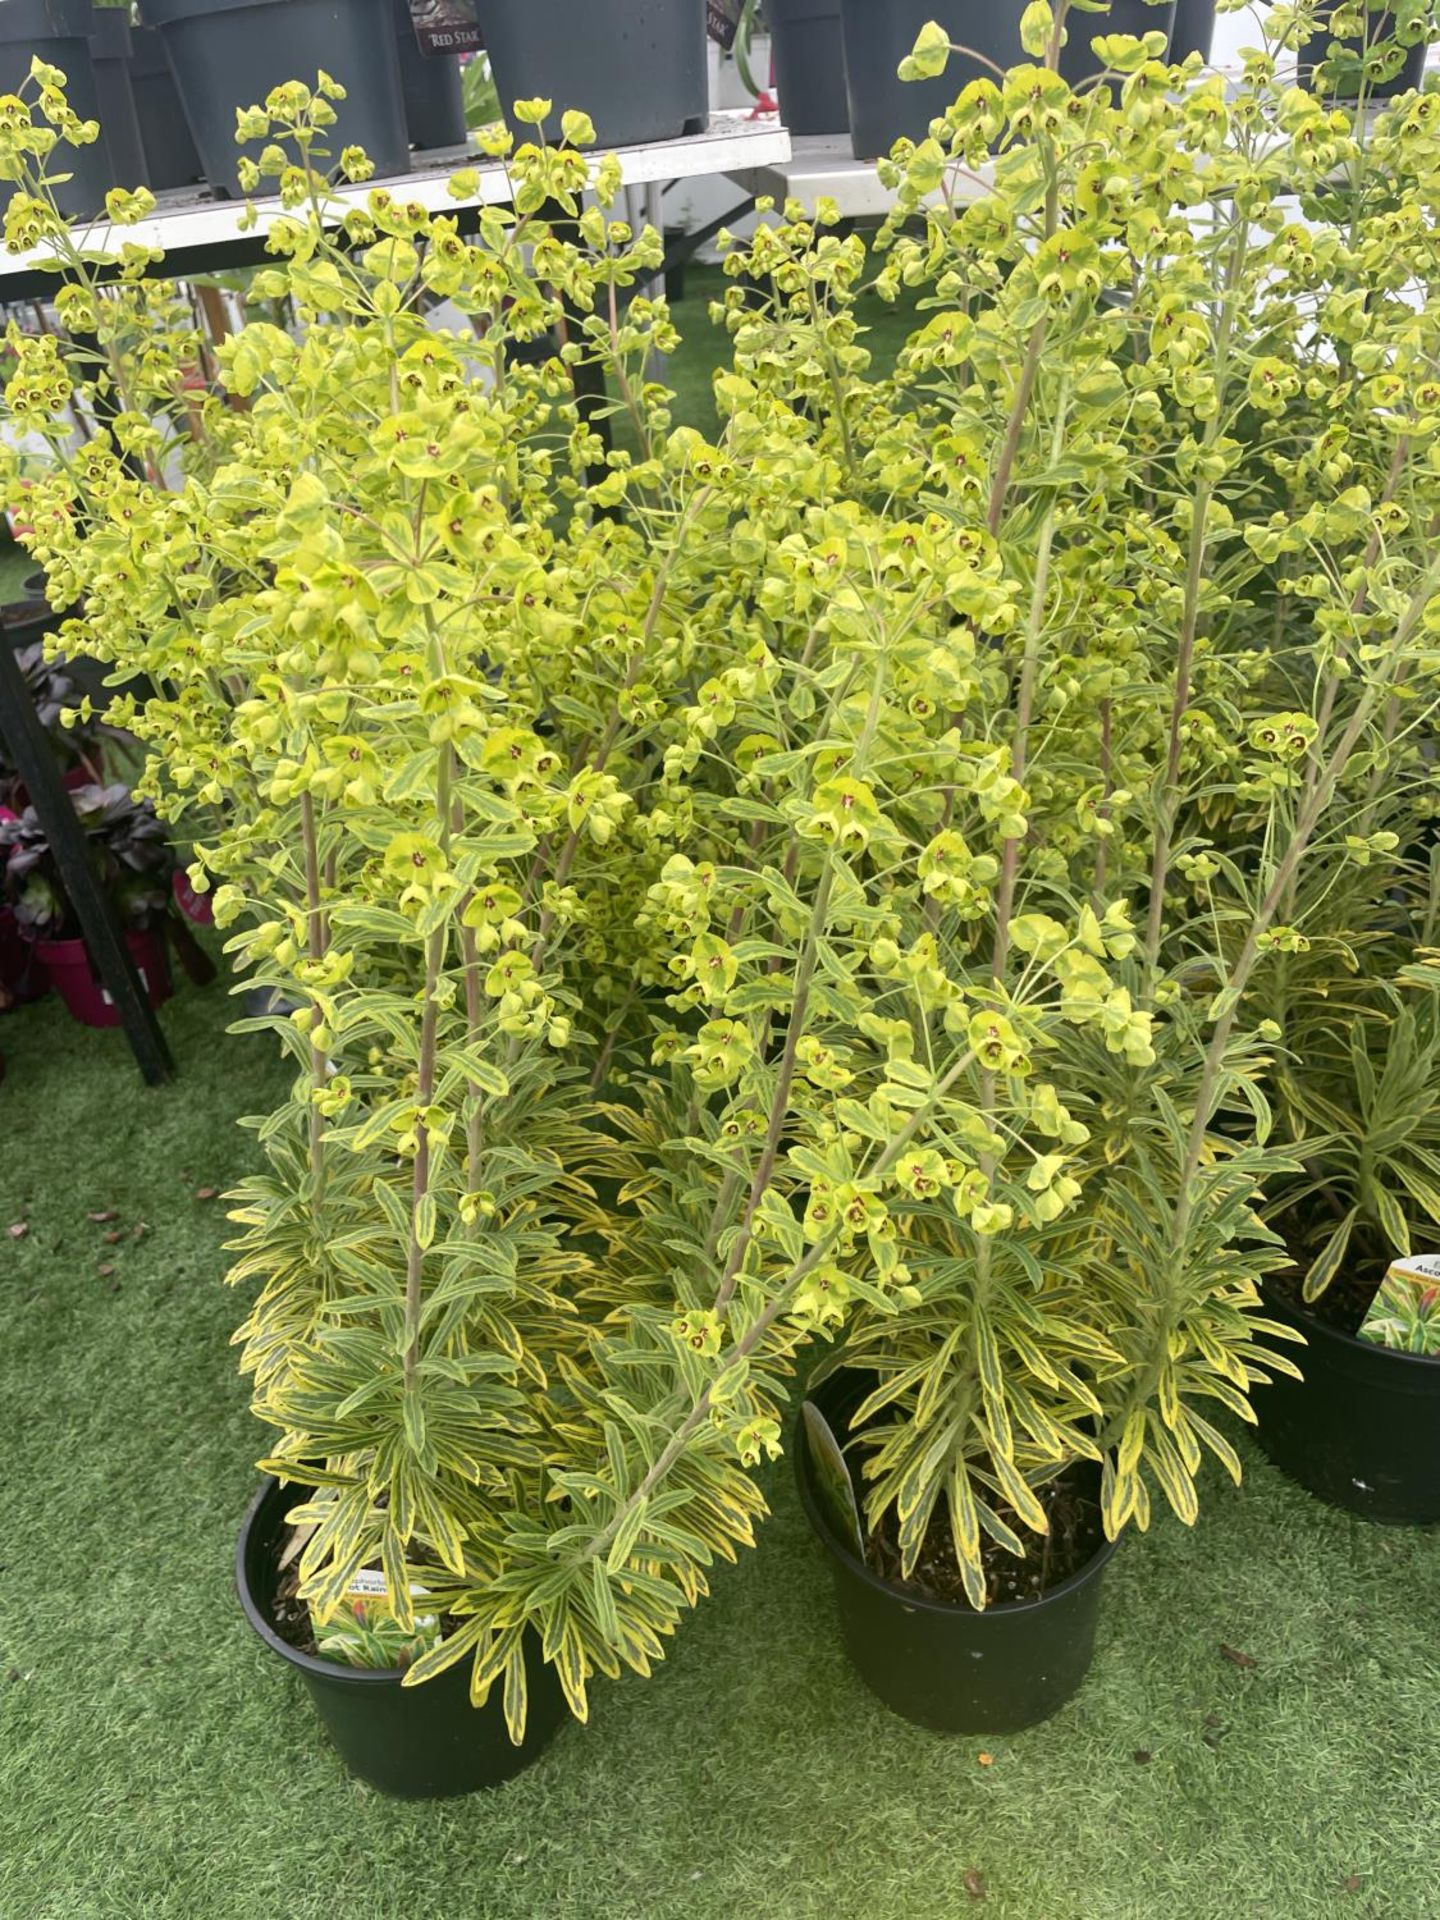 SIX EUPHORBIA ASCOT RAINBOW 80CM TALL TO BE SOLD FOR THE SIX PLUS VAT - Image 2 of 7